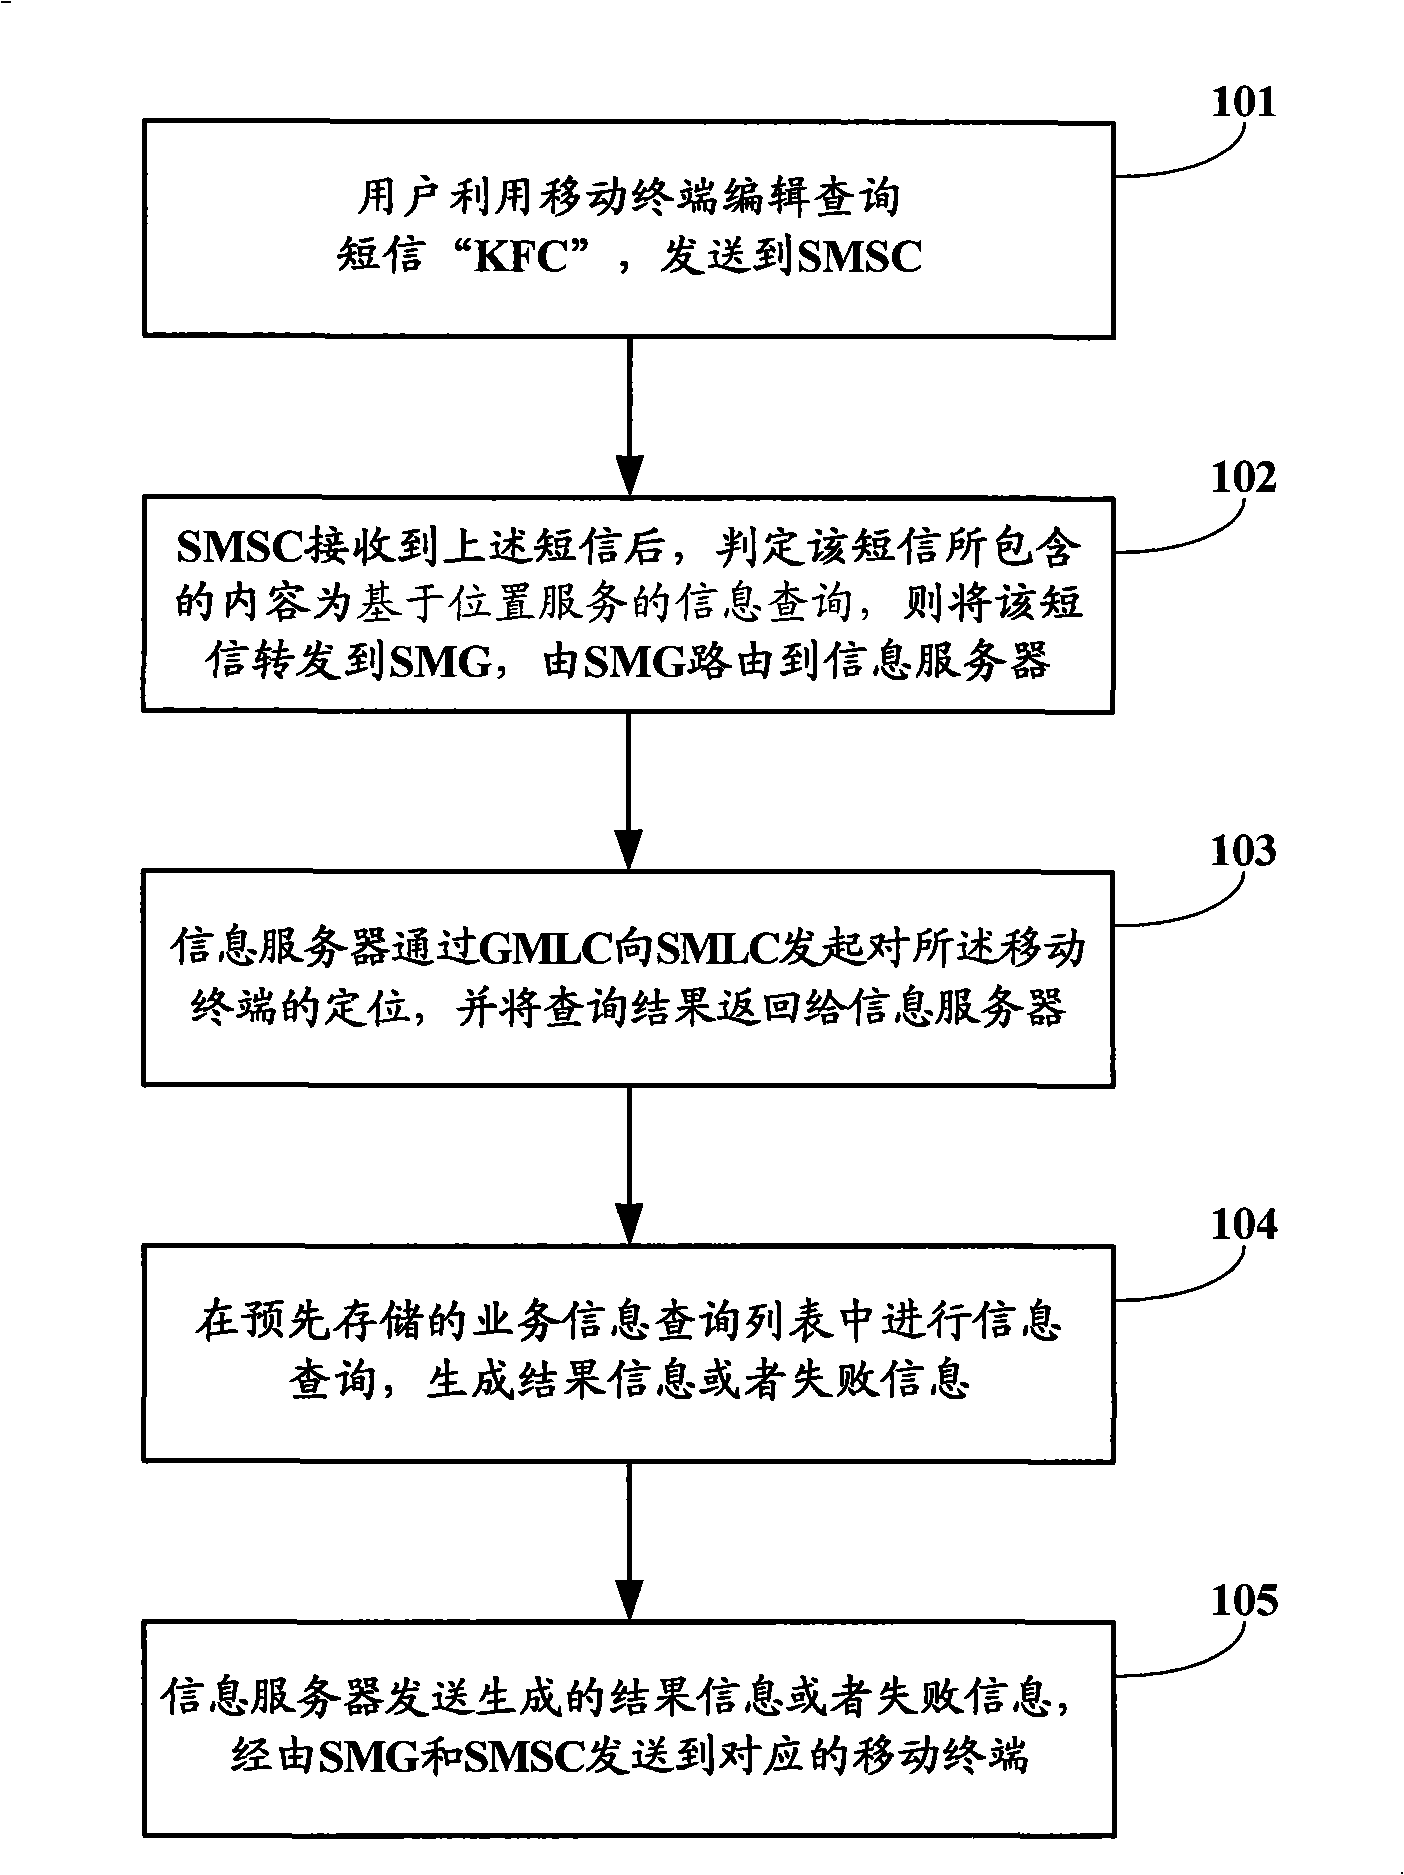 Method for querying recommendation information